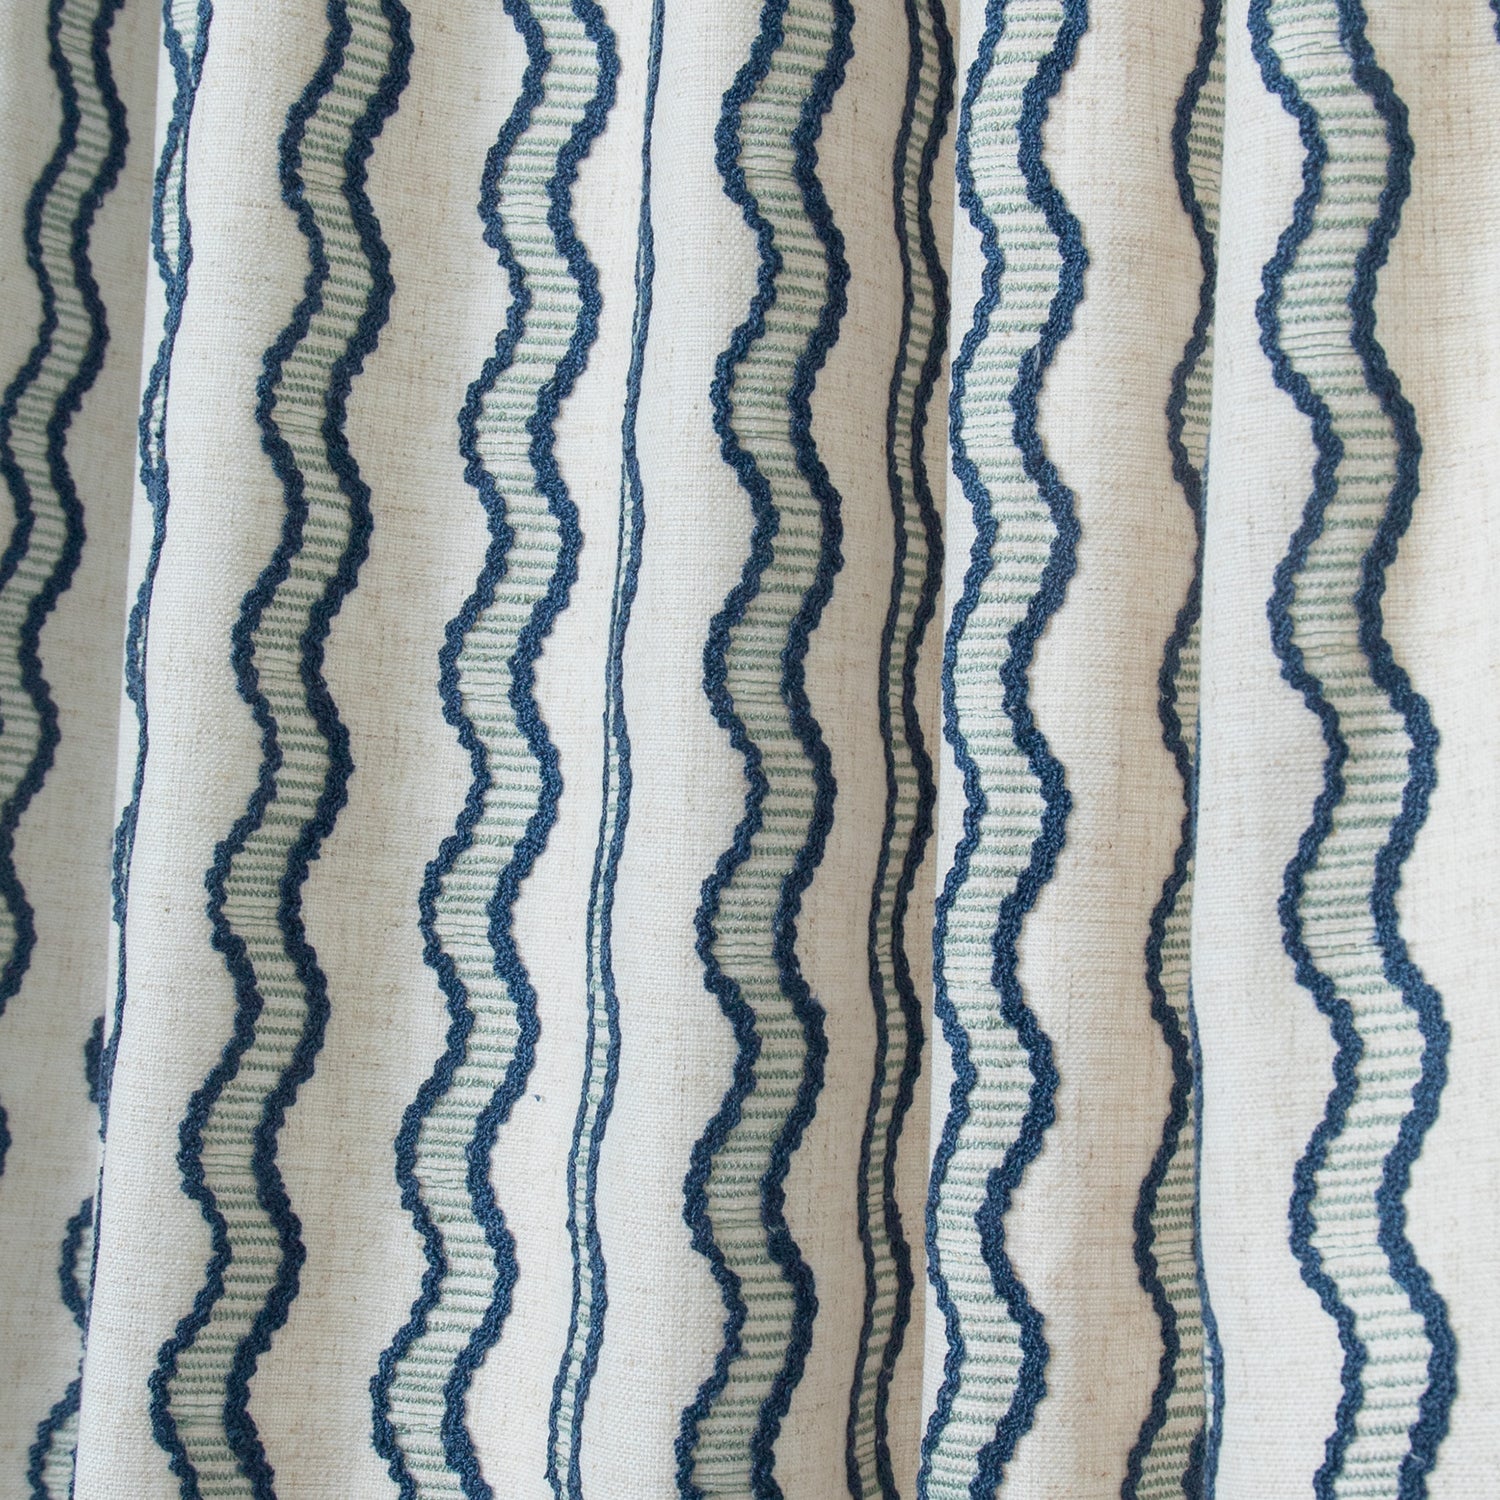 close up of embroidered cream curtains with wavy blue lines